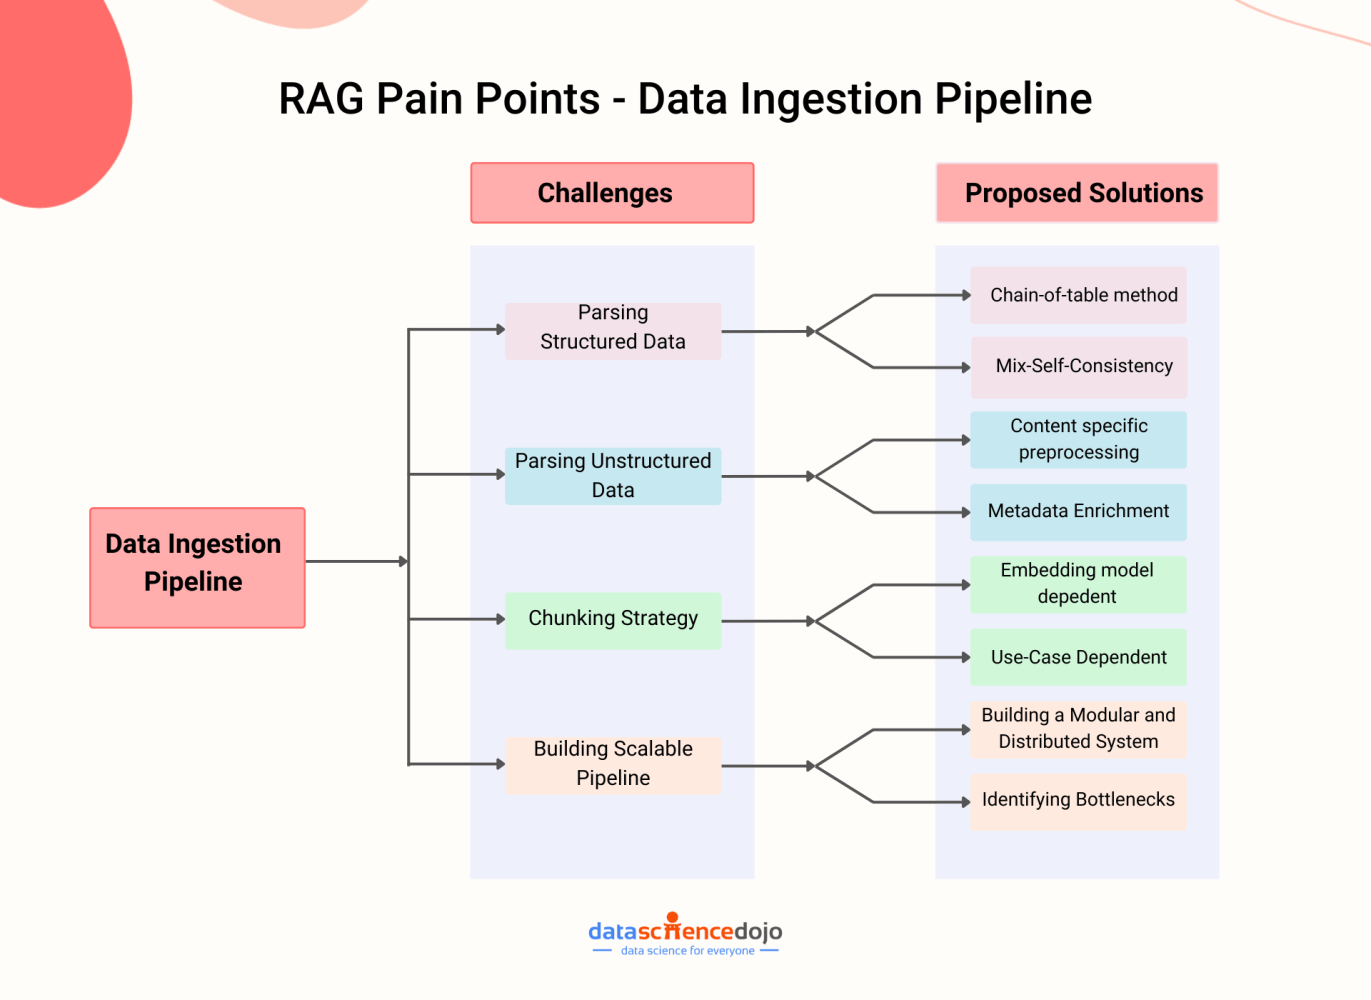 RAG Model - Pain Points and Solutions in the Data Ingestion Pipeline